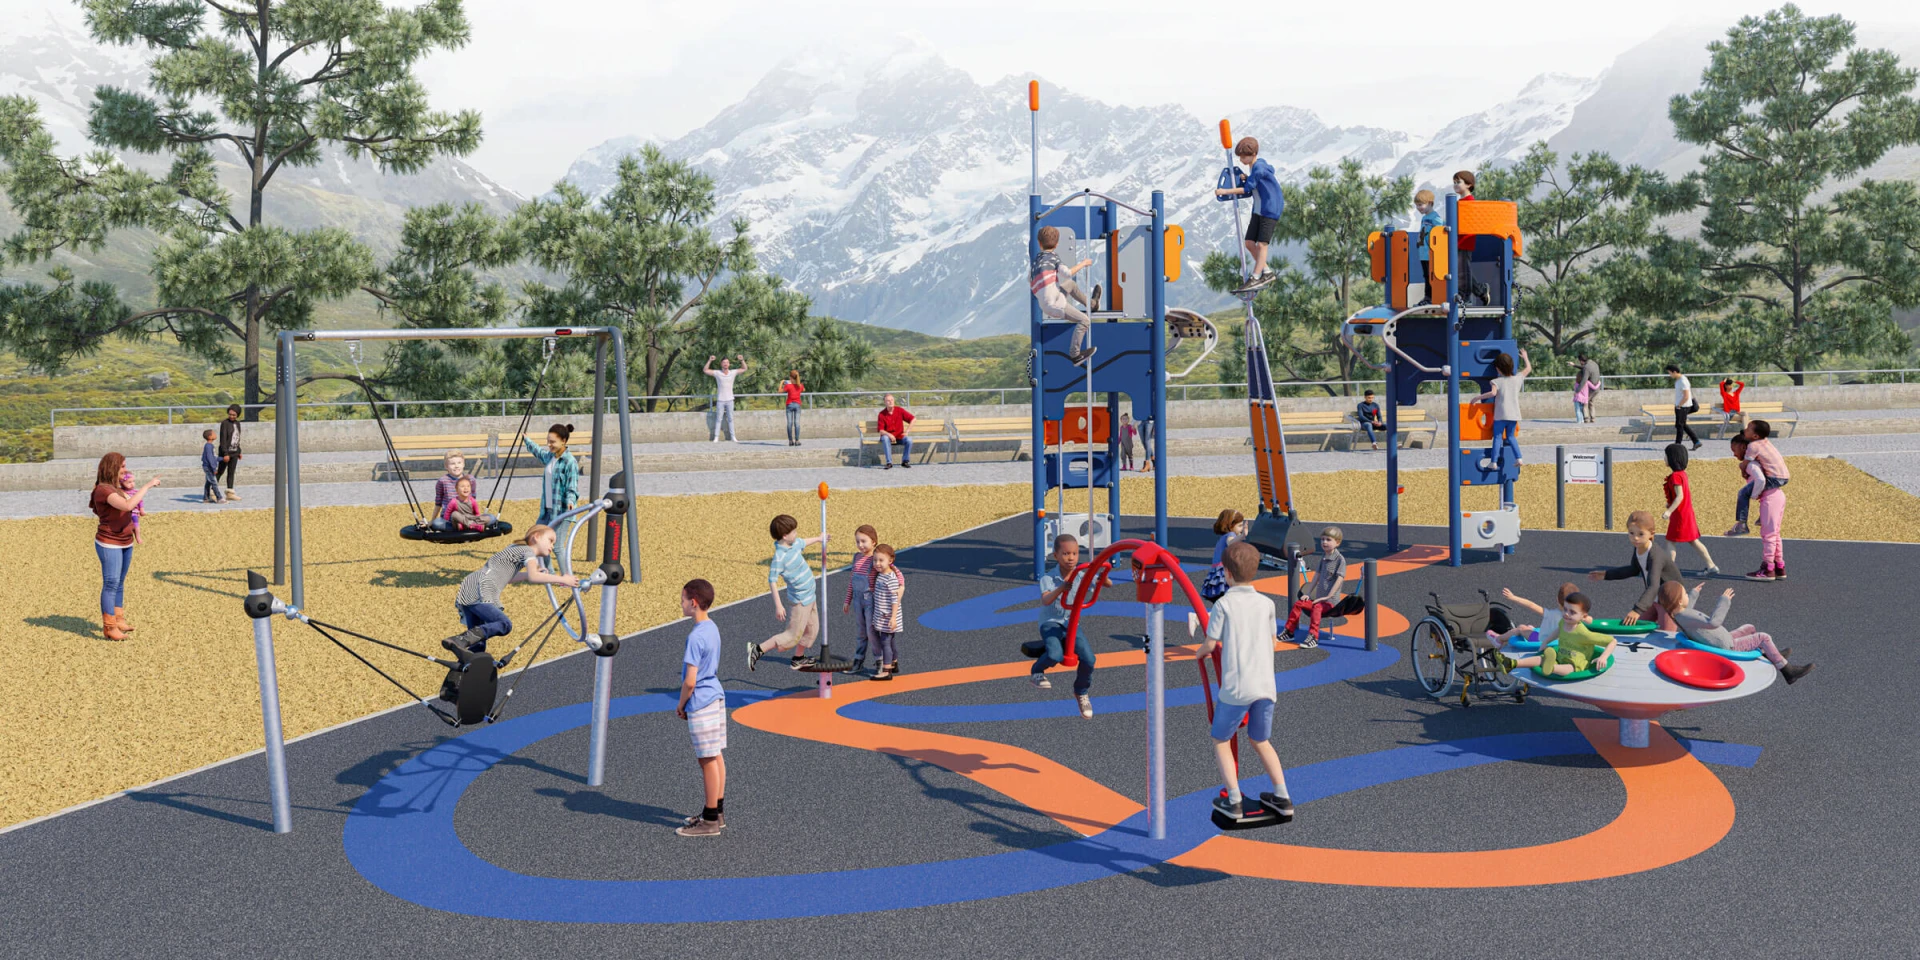 design idea of a playground for school-agers with thrilling play equipment